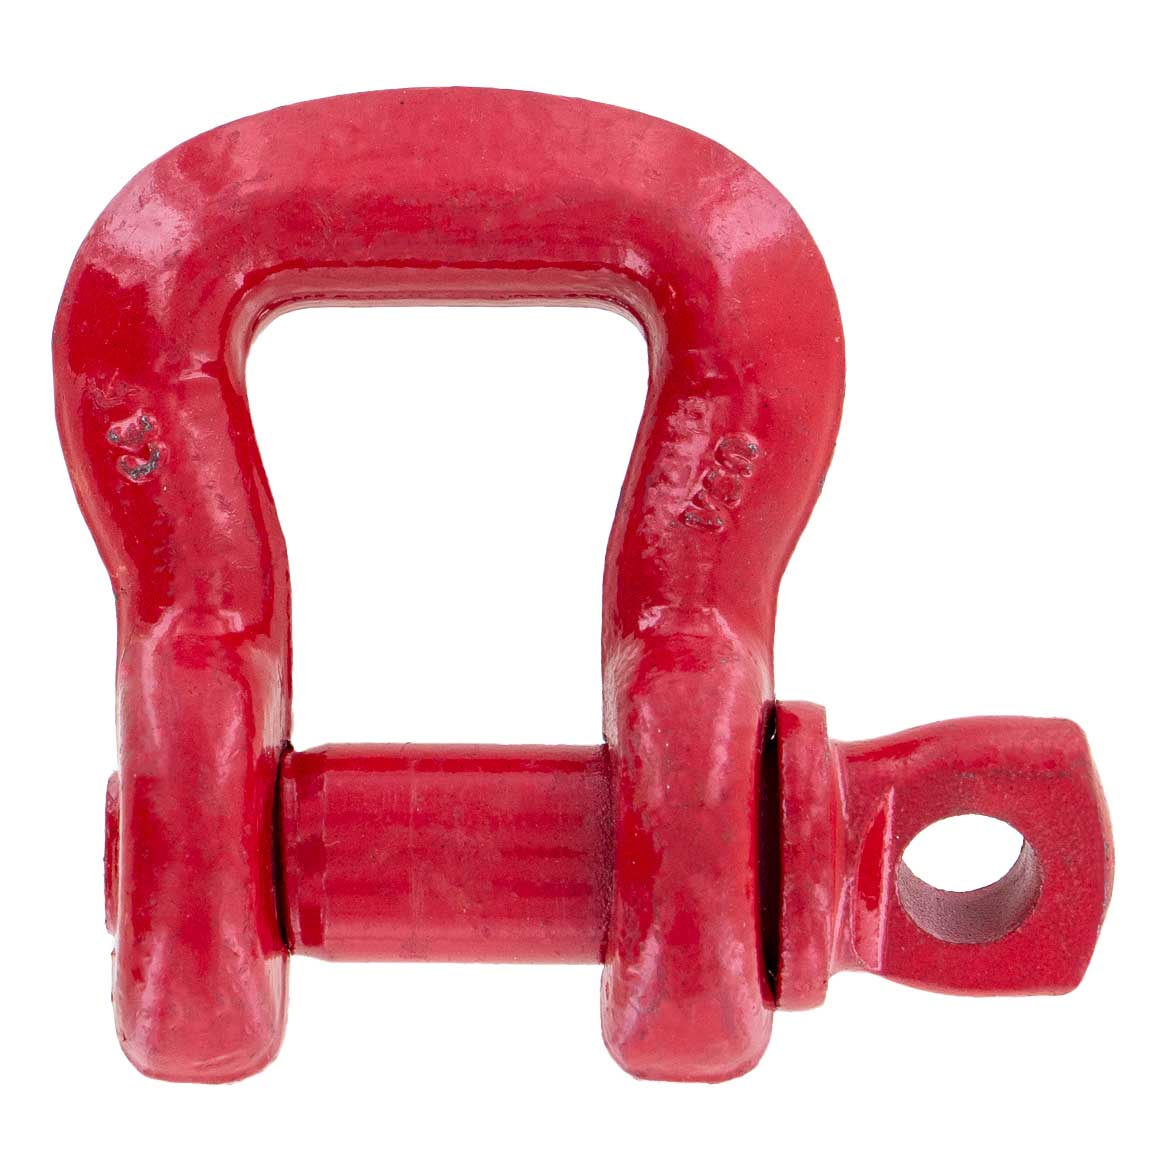 Crosby® Screw Pin Sling Saver Shackle | S-253 - 6"- 50 Ton primary image